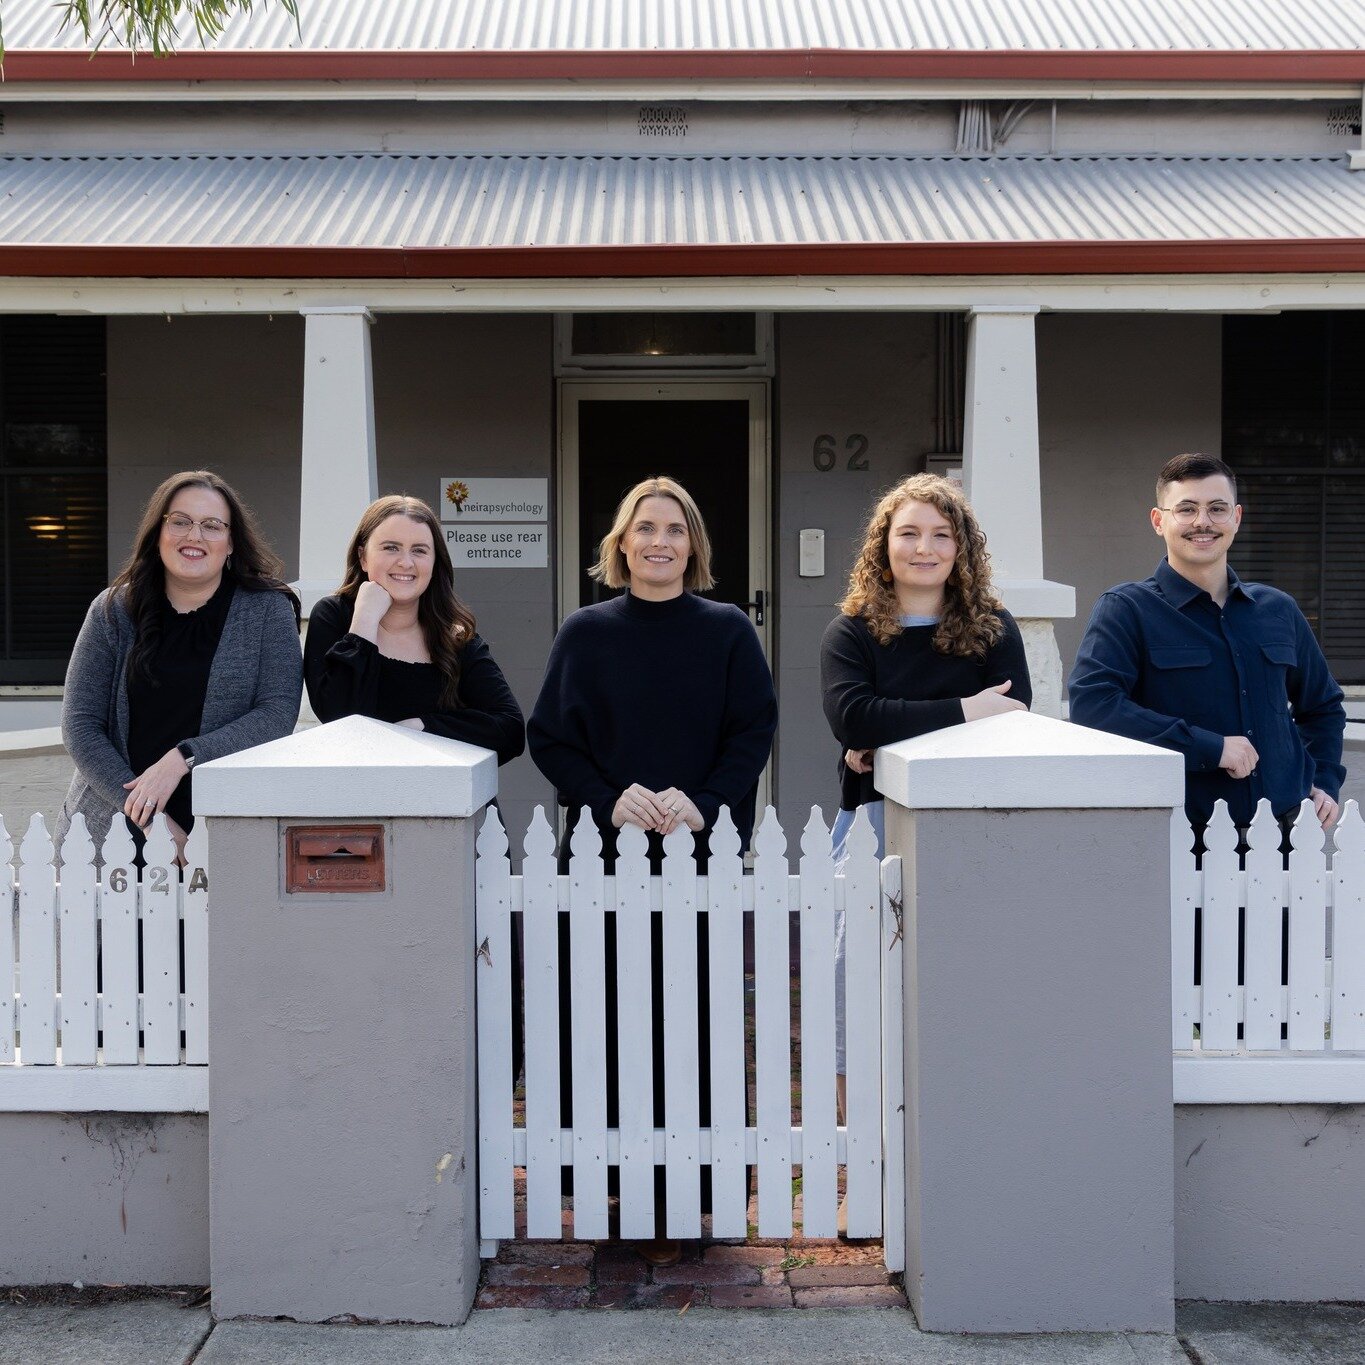 @neirapsychology  is a private psychology practice located in Freo. Neira booked us to photograph their staff portraits and stock images for their website.

#businessmarketing #perthmarketing #perthphotography #perthphotographers #fremantle #fremantl